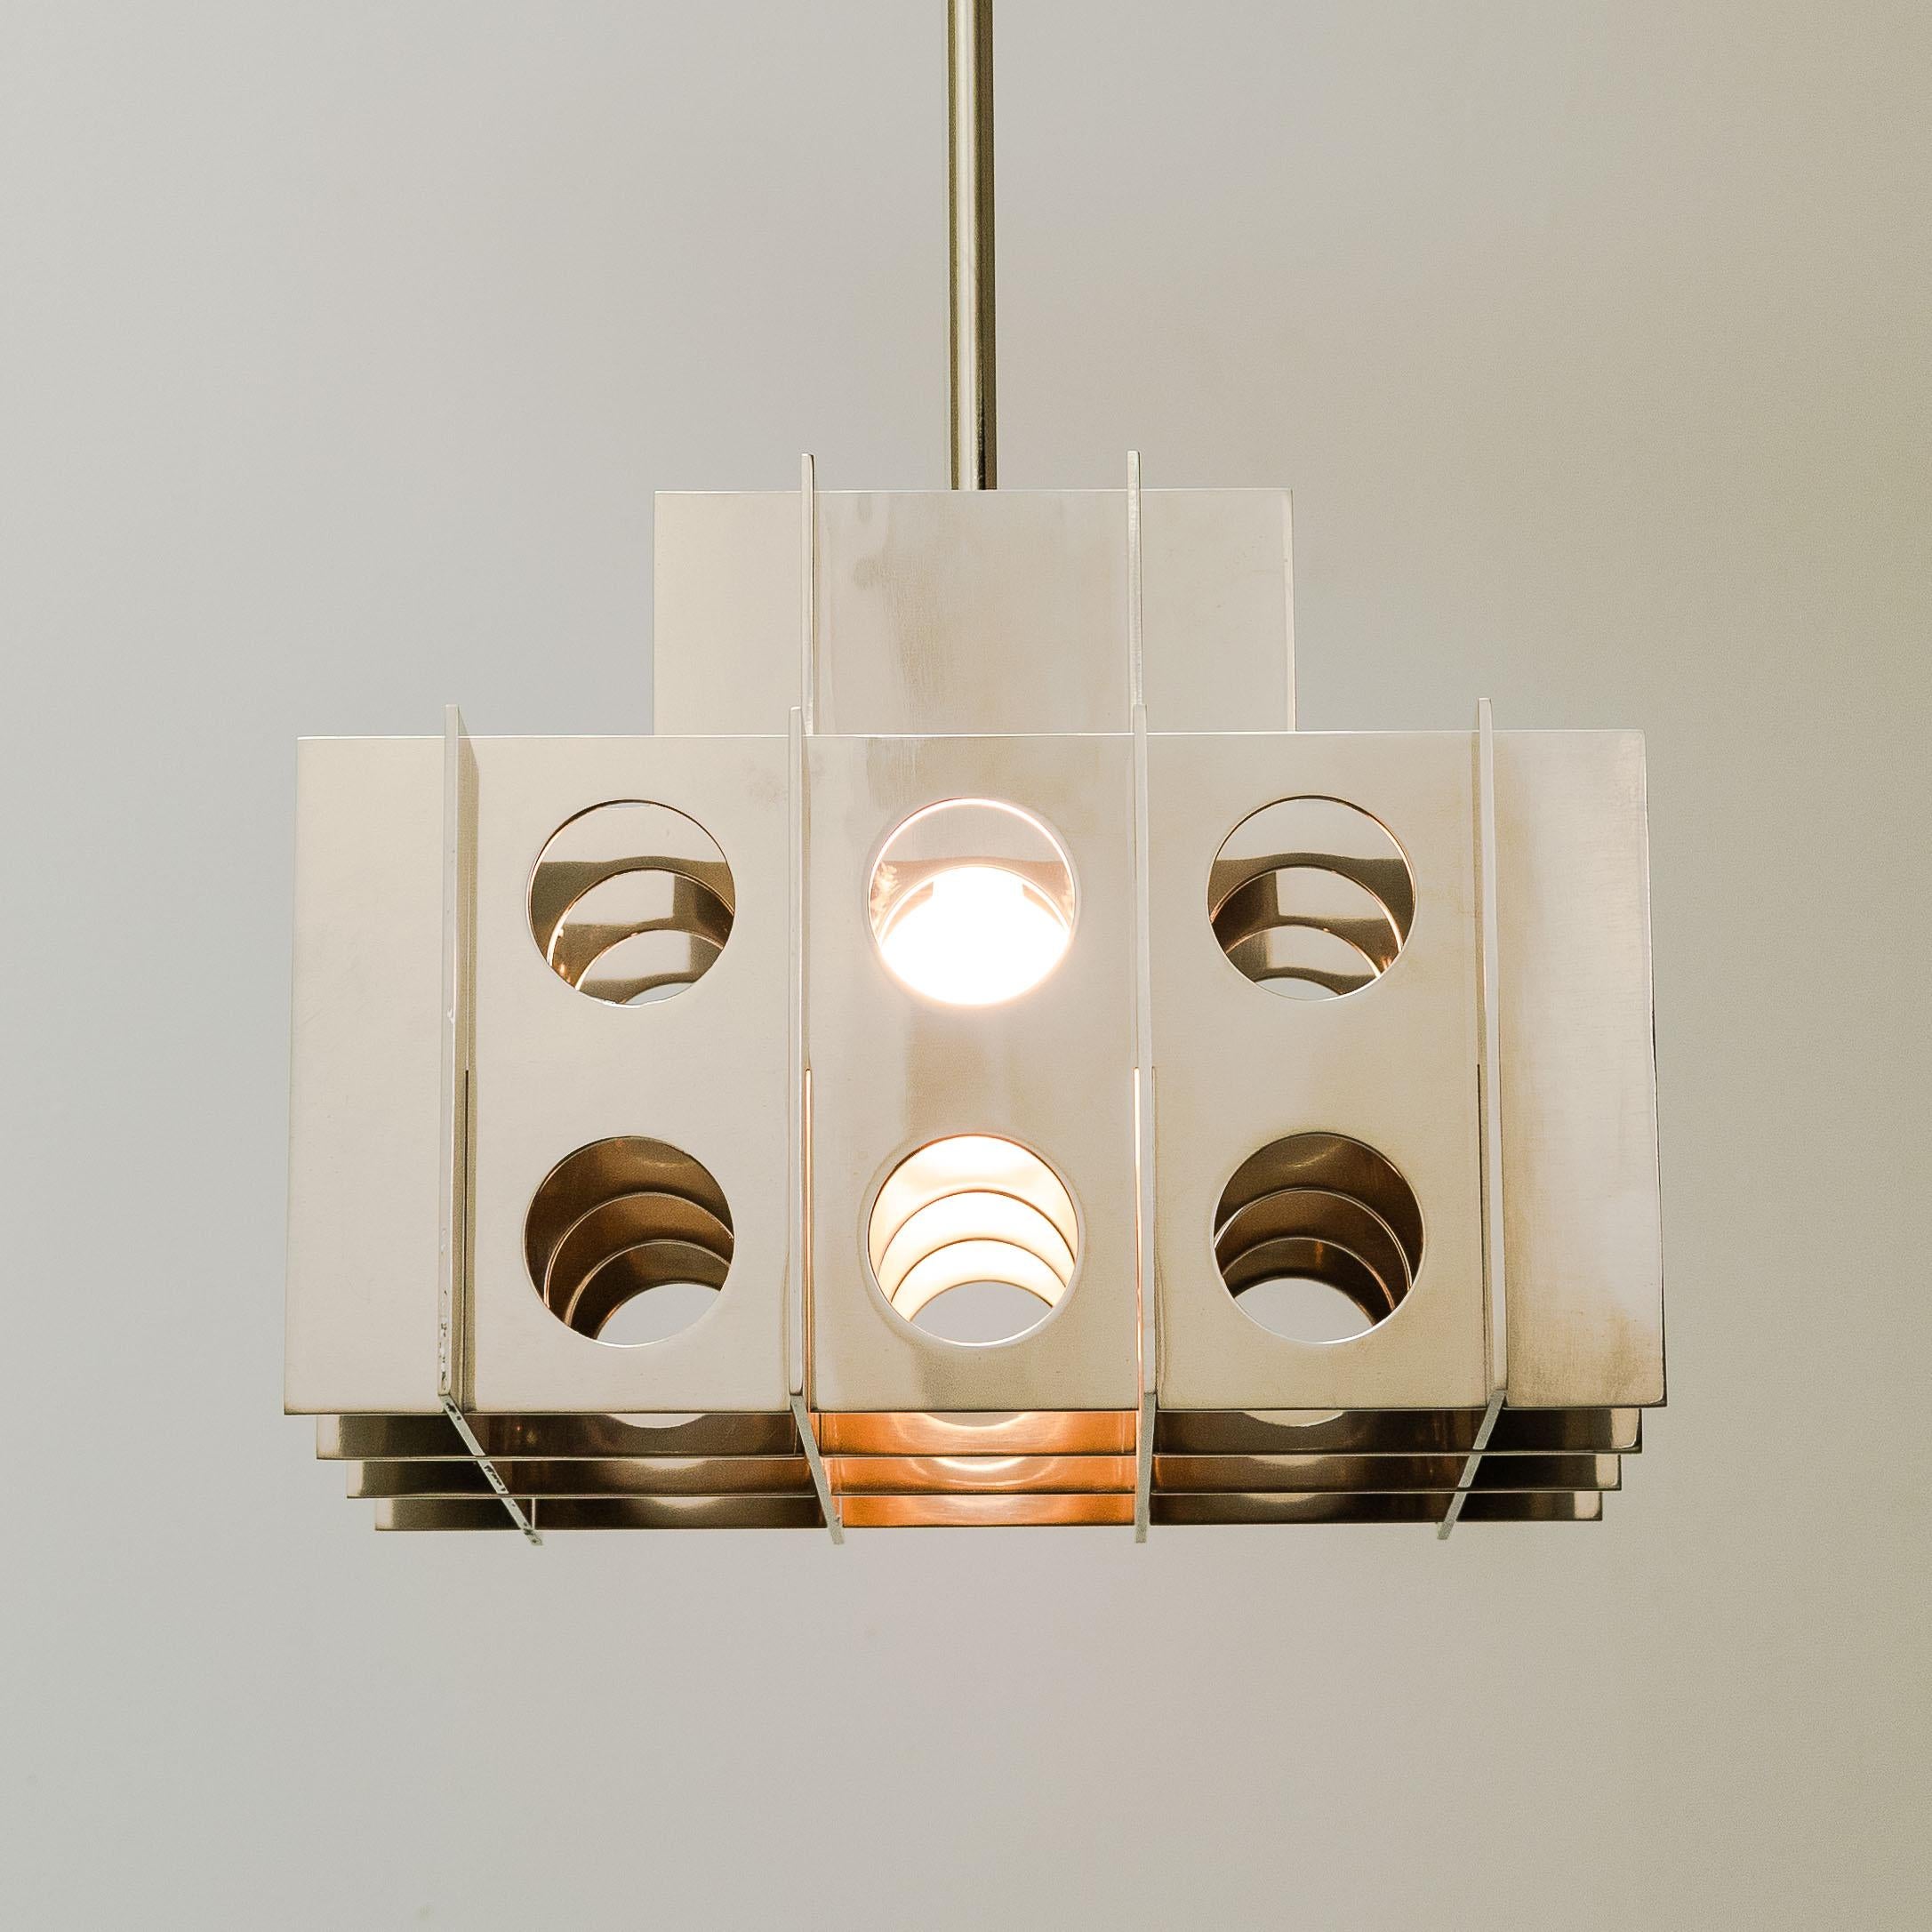 Contemporary Tenfold Pendant 3TA 18inch, Waxed Aluminum, Geometric, Brutalist Ceiling Light For Sale